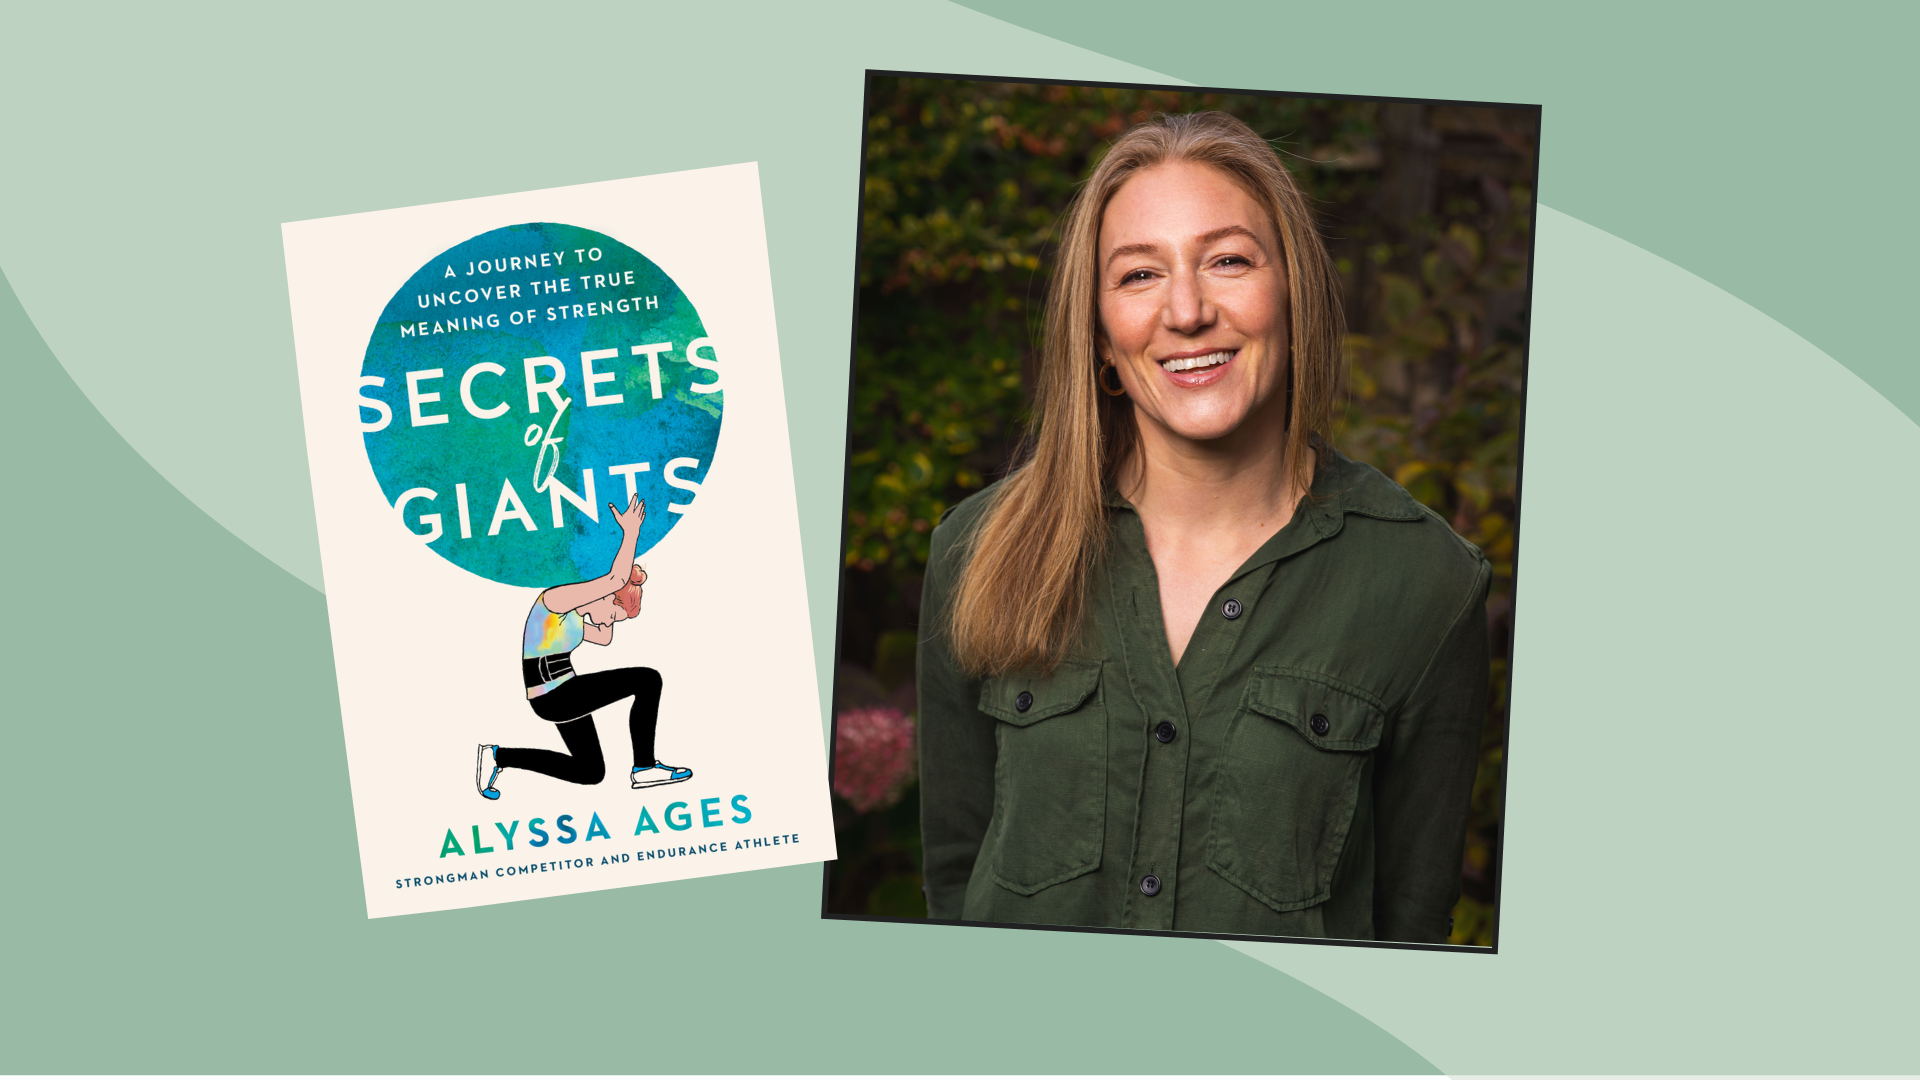 “Secrets of Giants” by Alyssa Ages cover photo